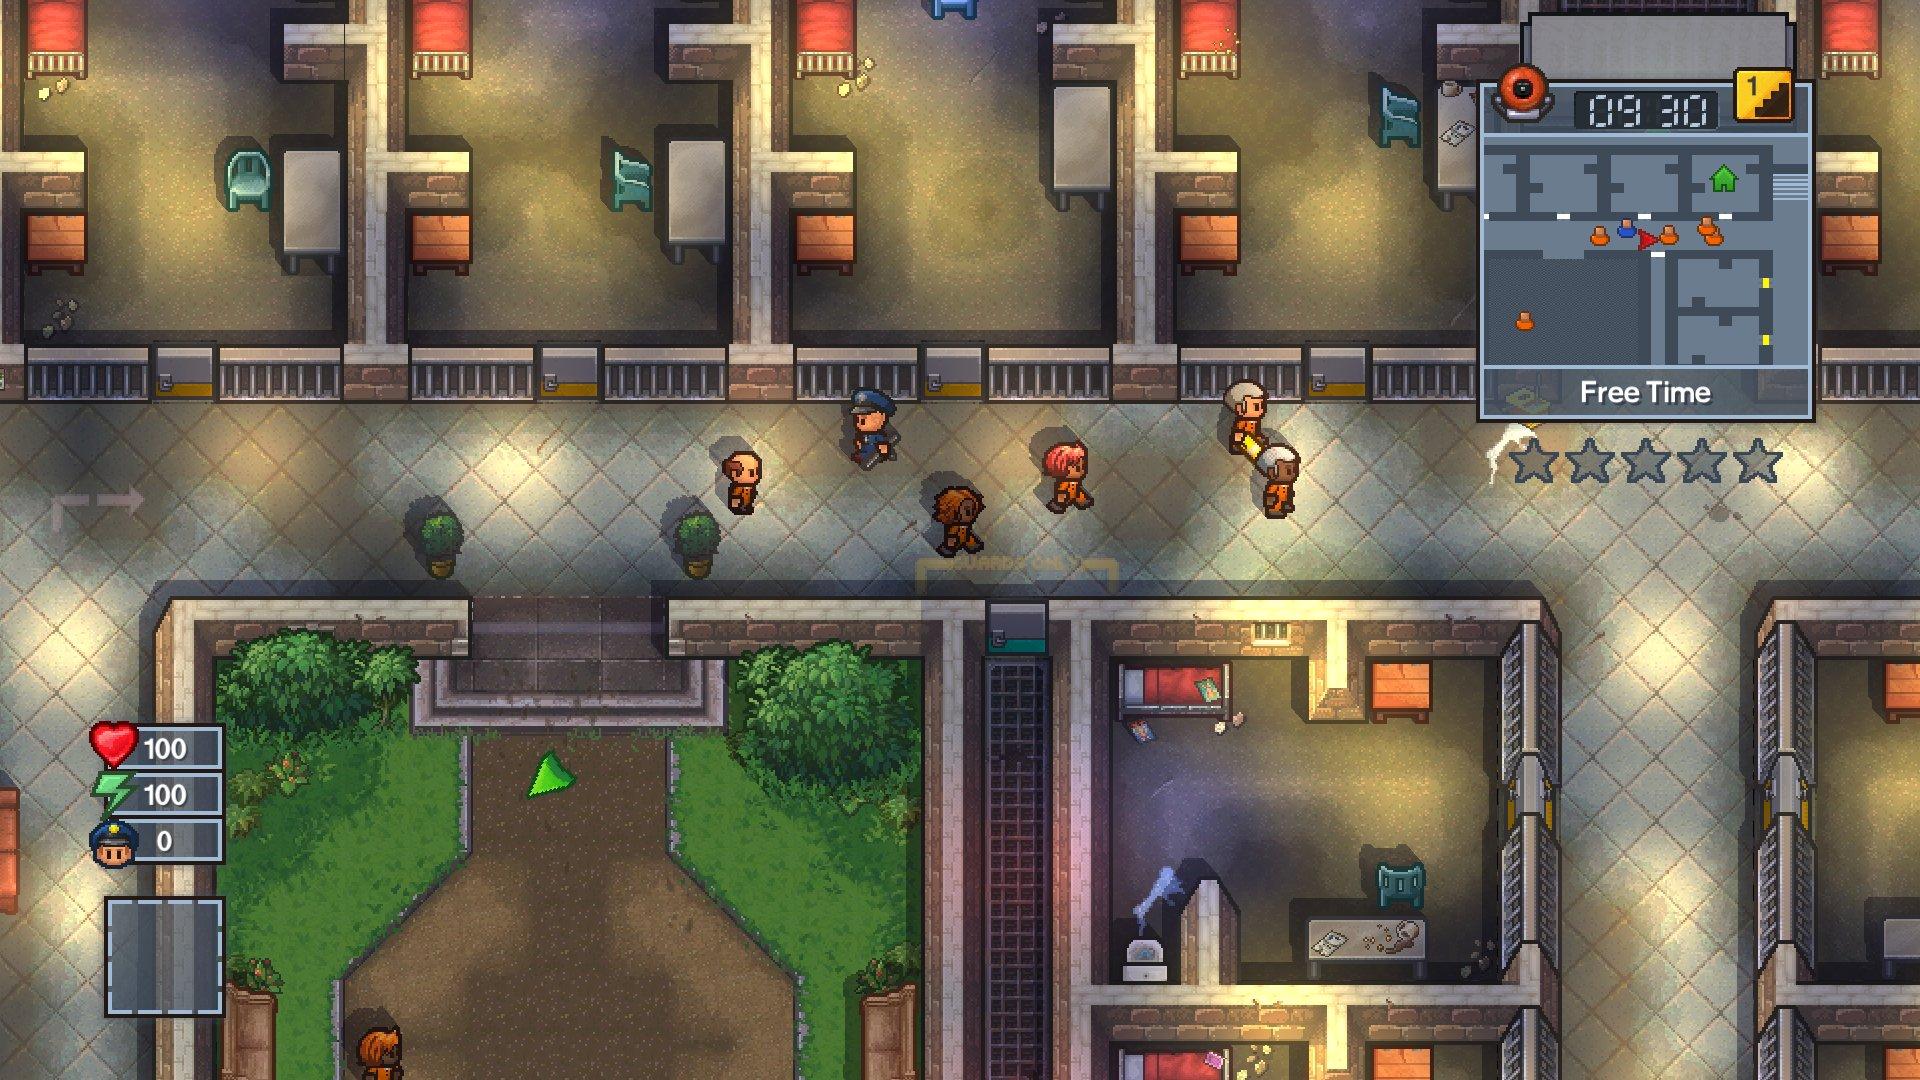 free download the escapists 2 xbox